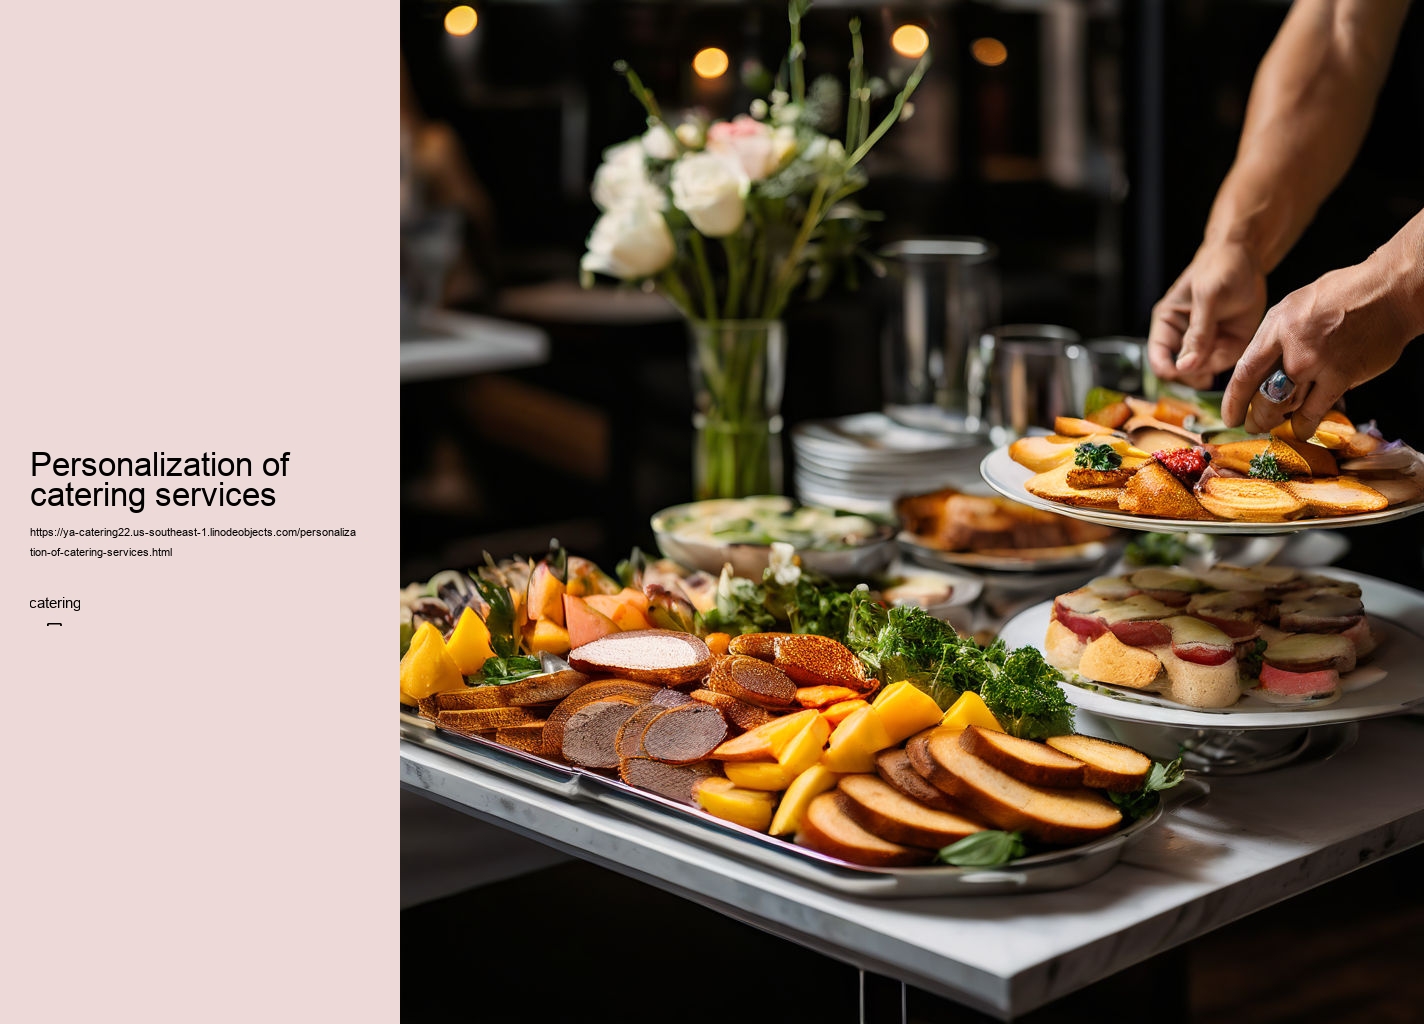 Personalization of catering services